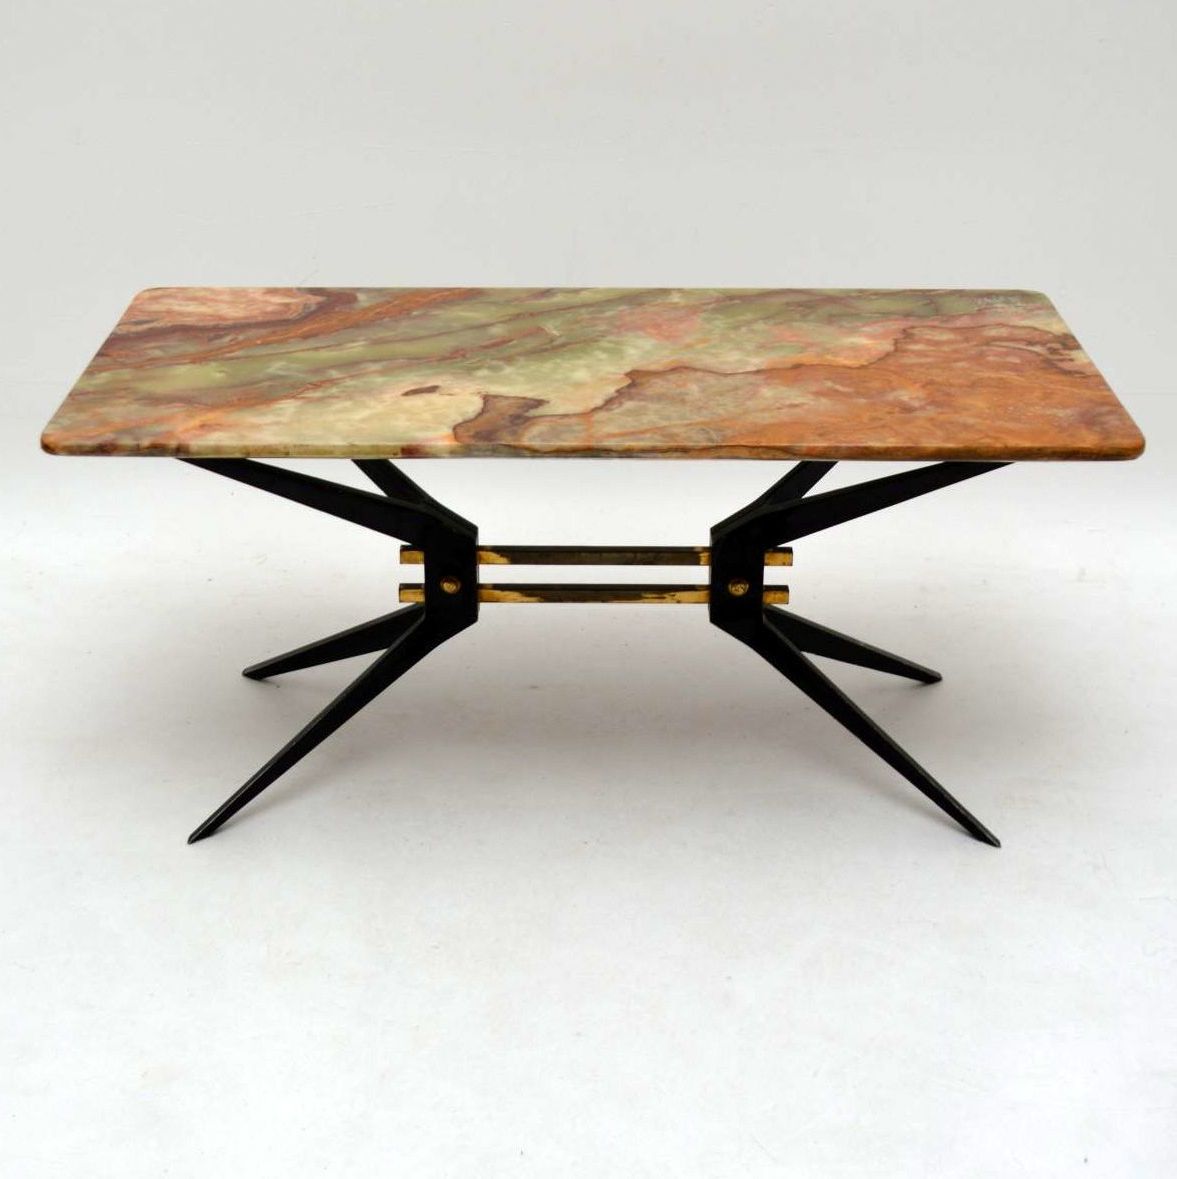 Antique Silver Aluminum Coffee Tables In Widely Used Retro Italian Onyx & Steel Coffee Table Vintage 1950's (View 9 of 20)